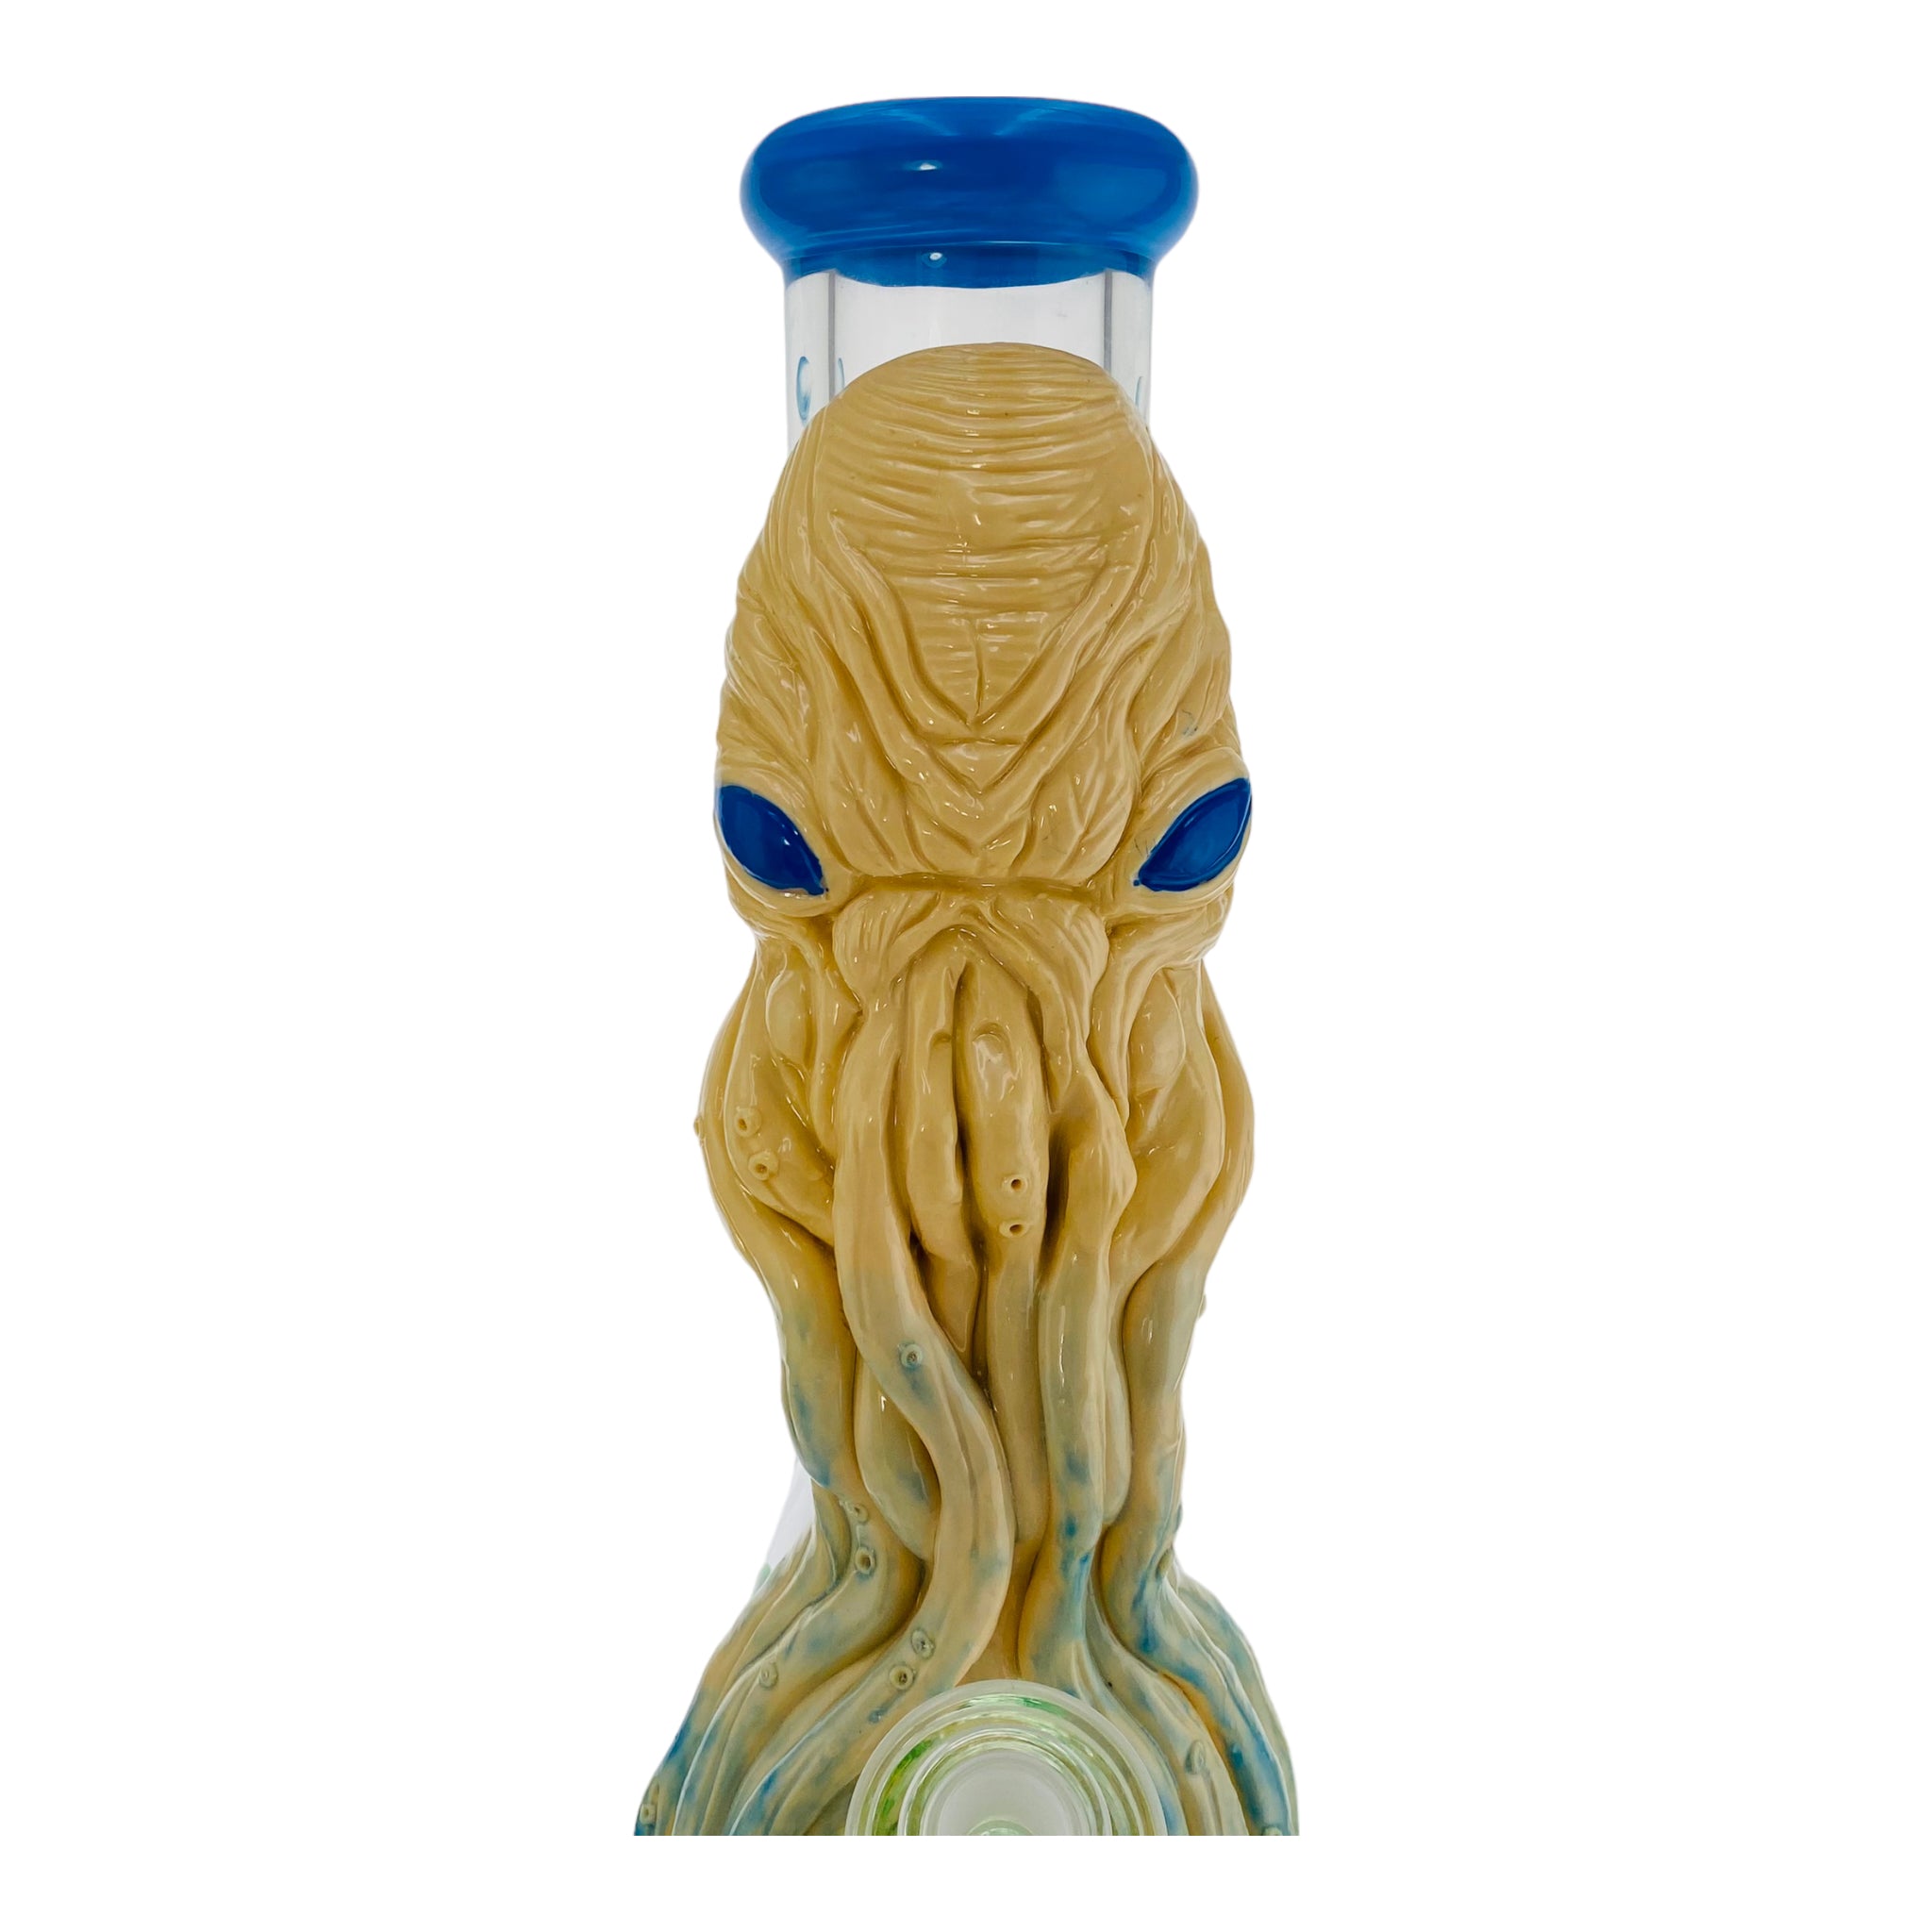 12 Inch Octopus Face Beaker Bong With Blue Mouthpiece anime and character bong